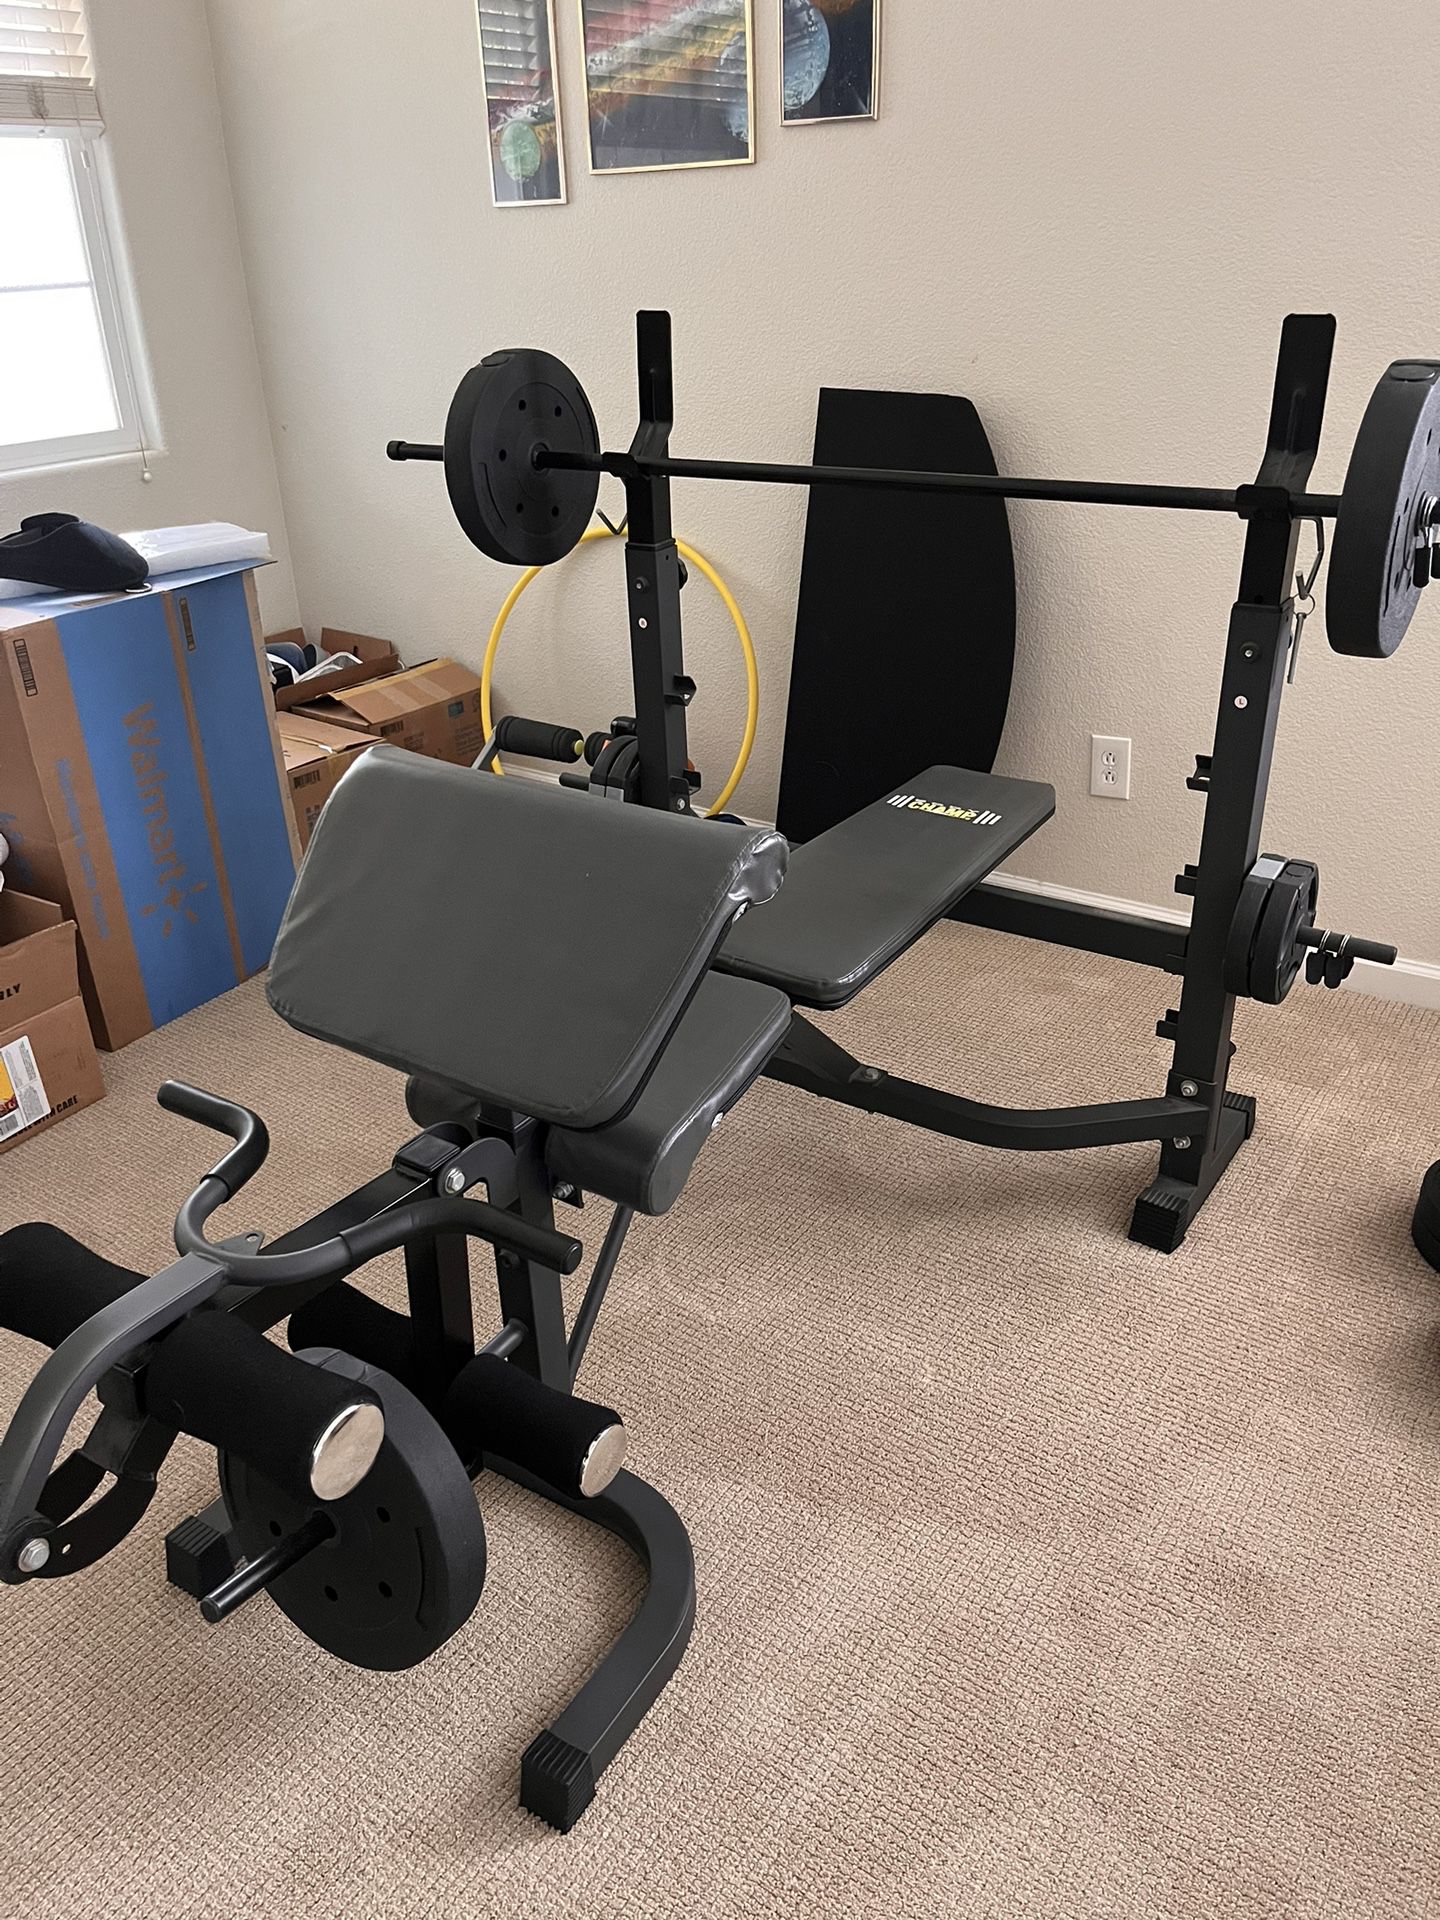 Workout Bench w/weights